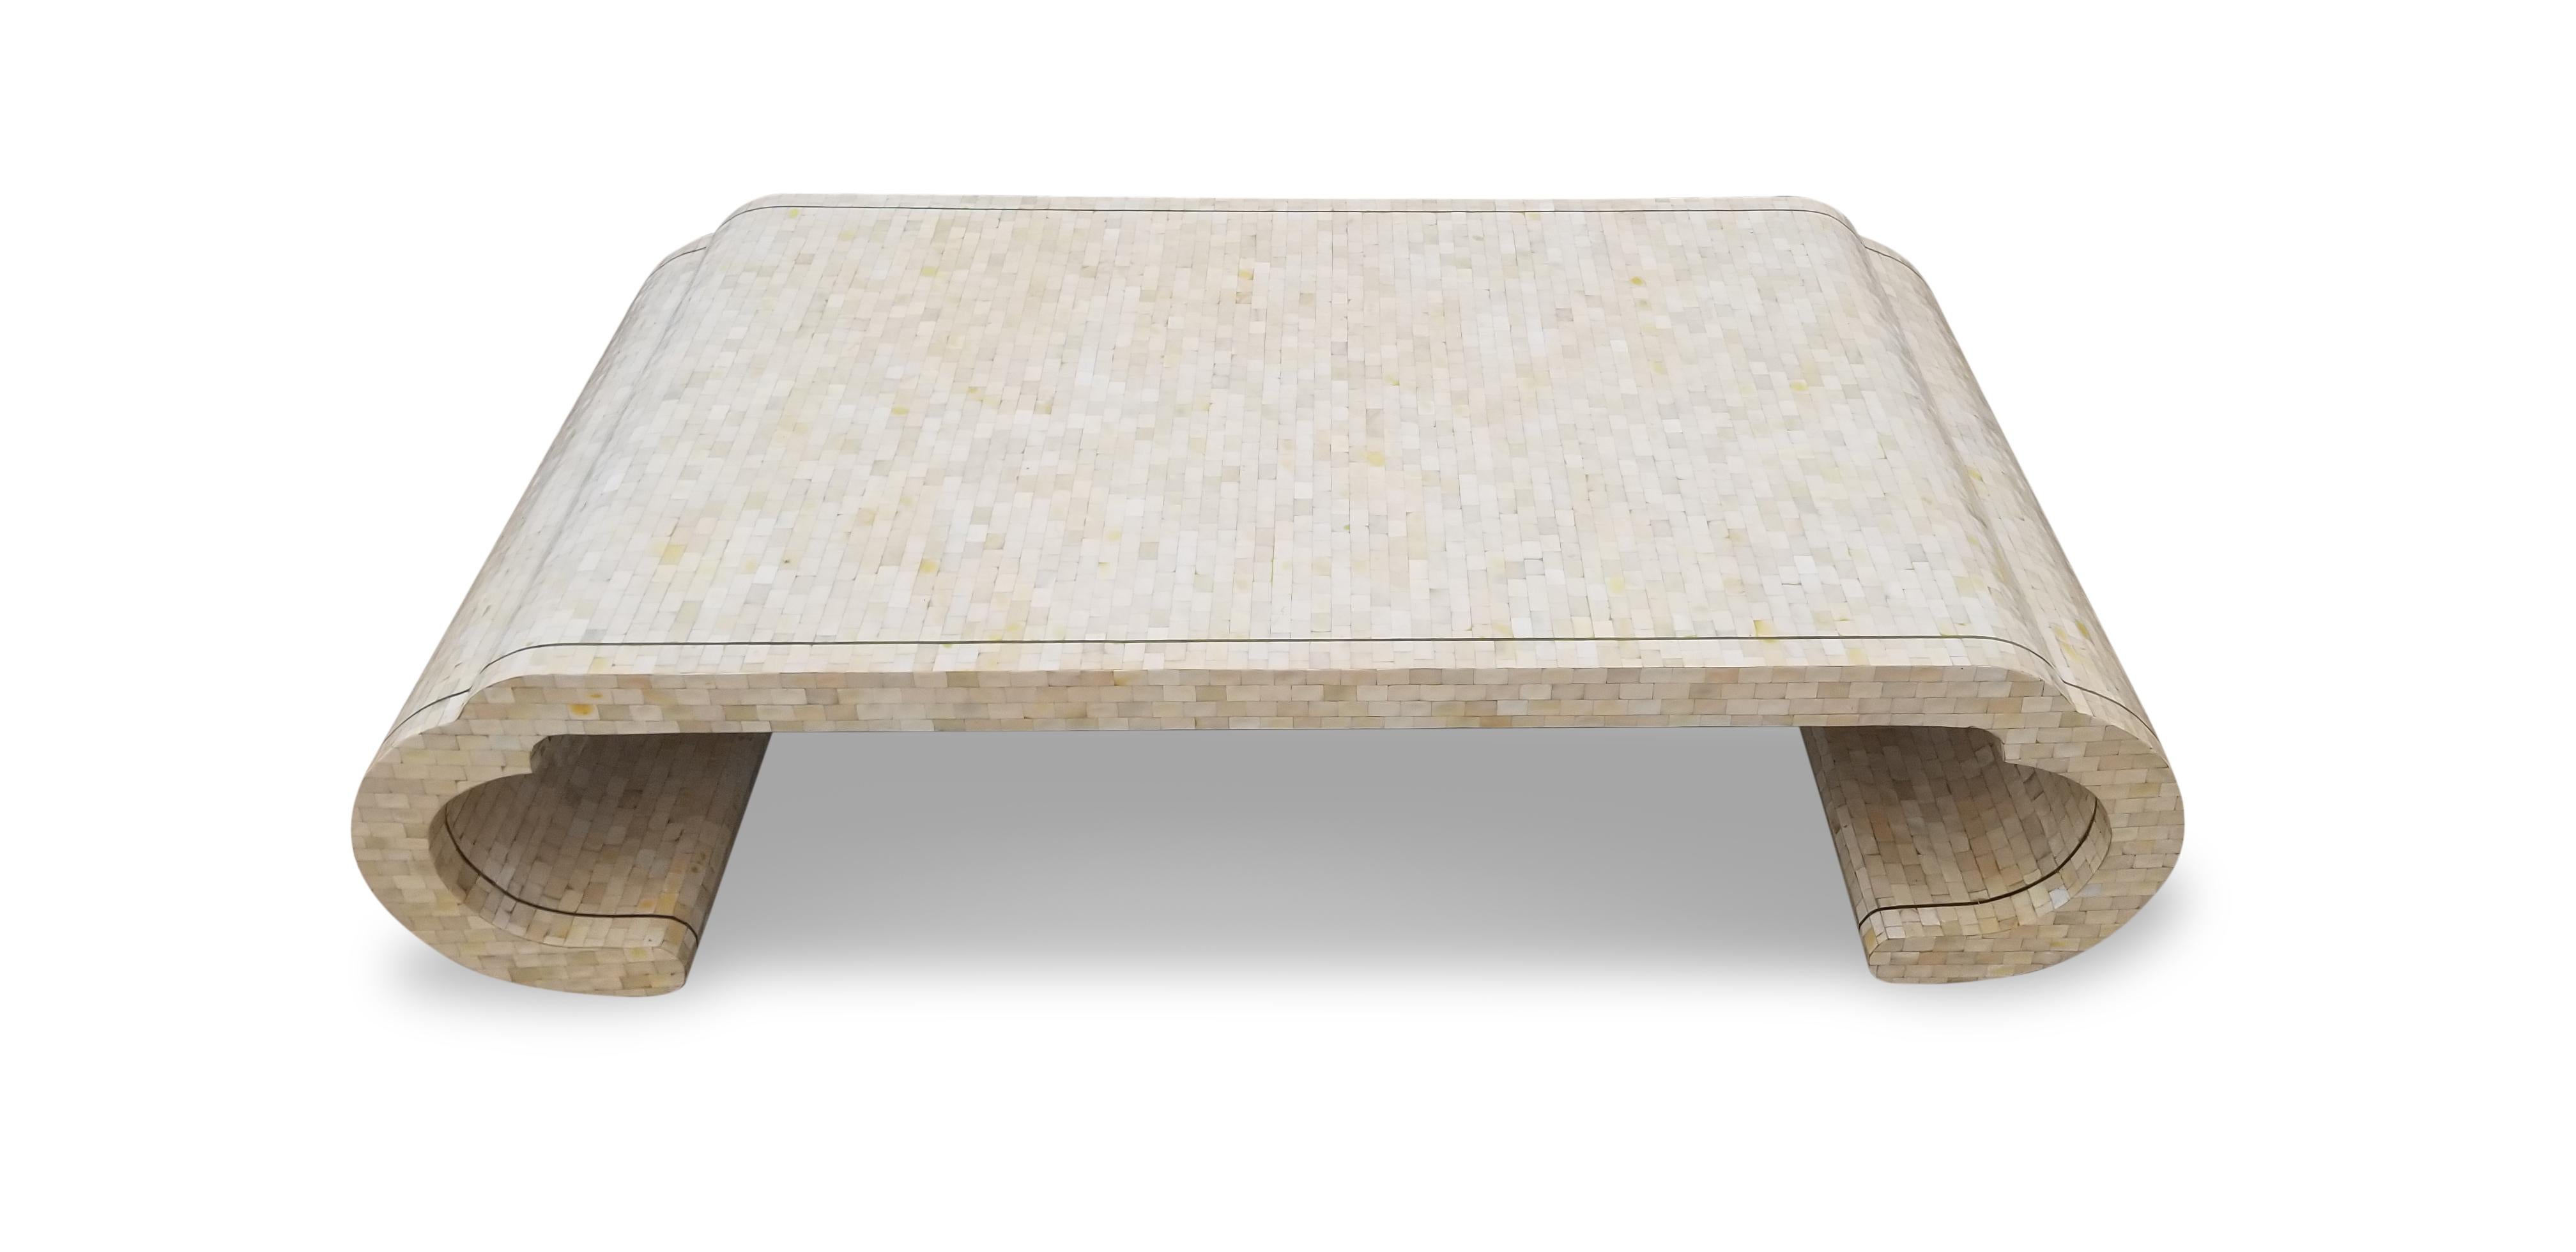 Philippine Maitland Smith Tesselated Bone Coffee Table with Brass Edge Detail